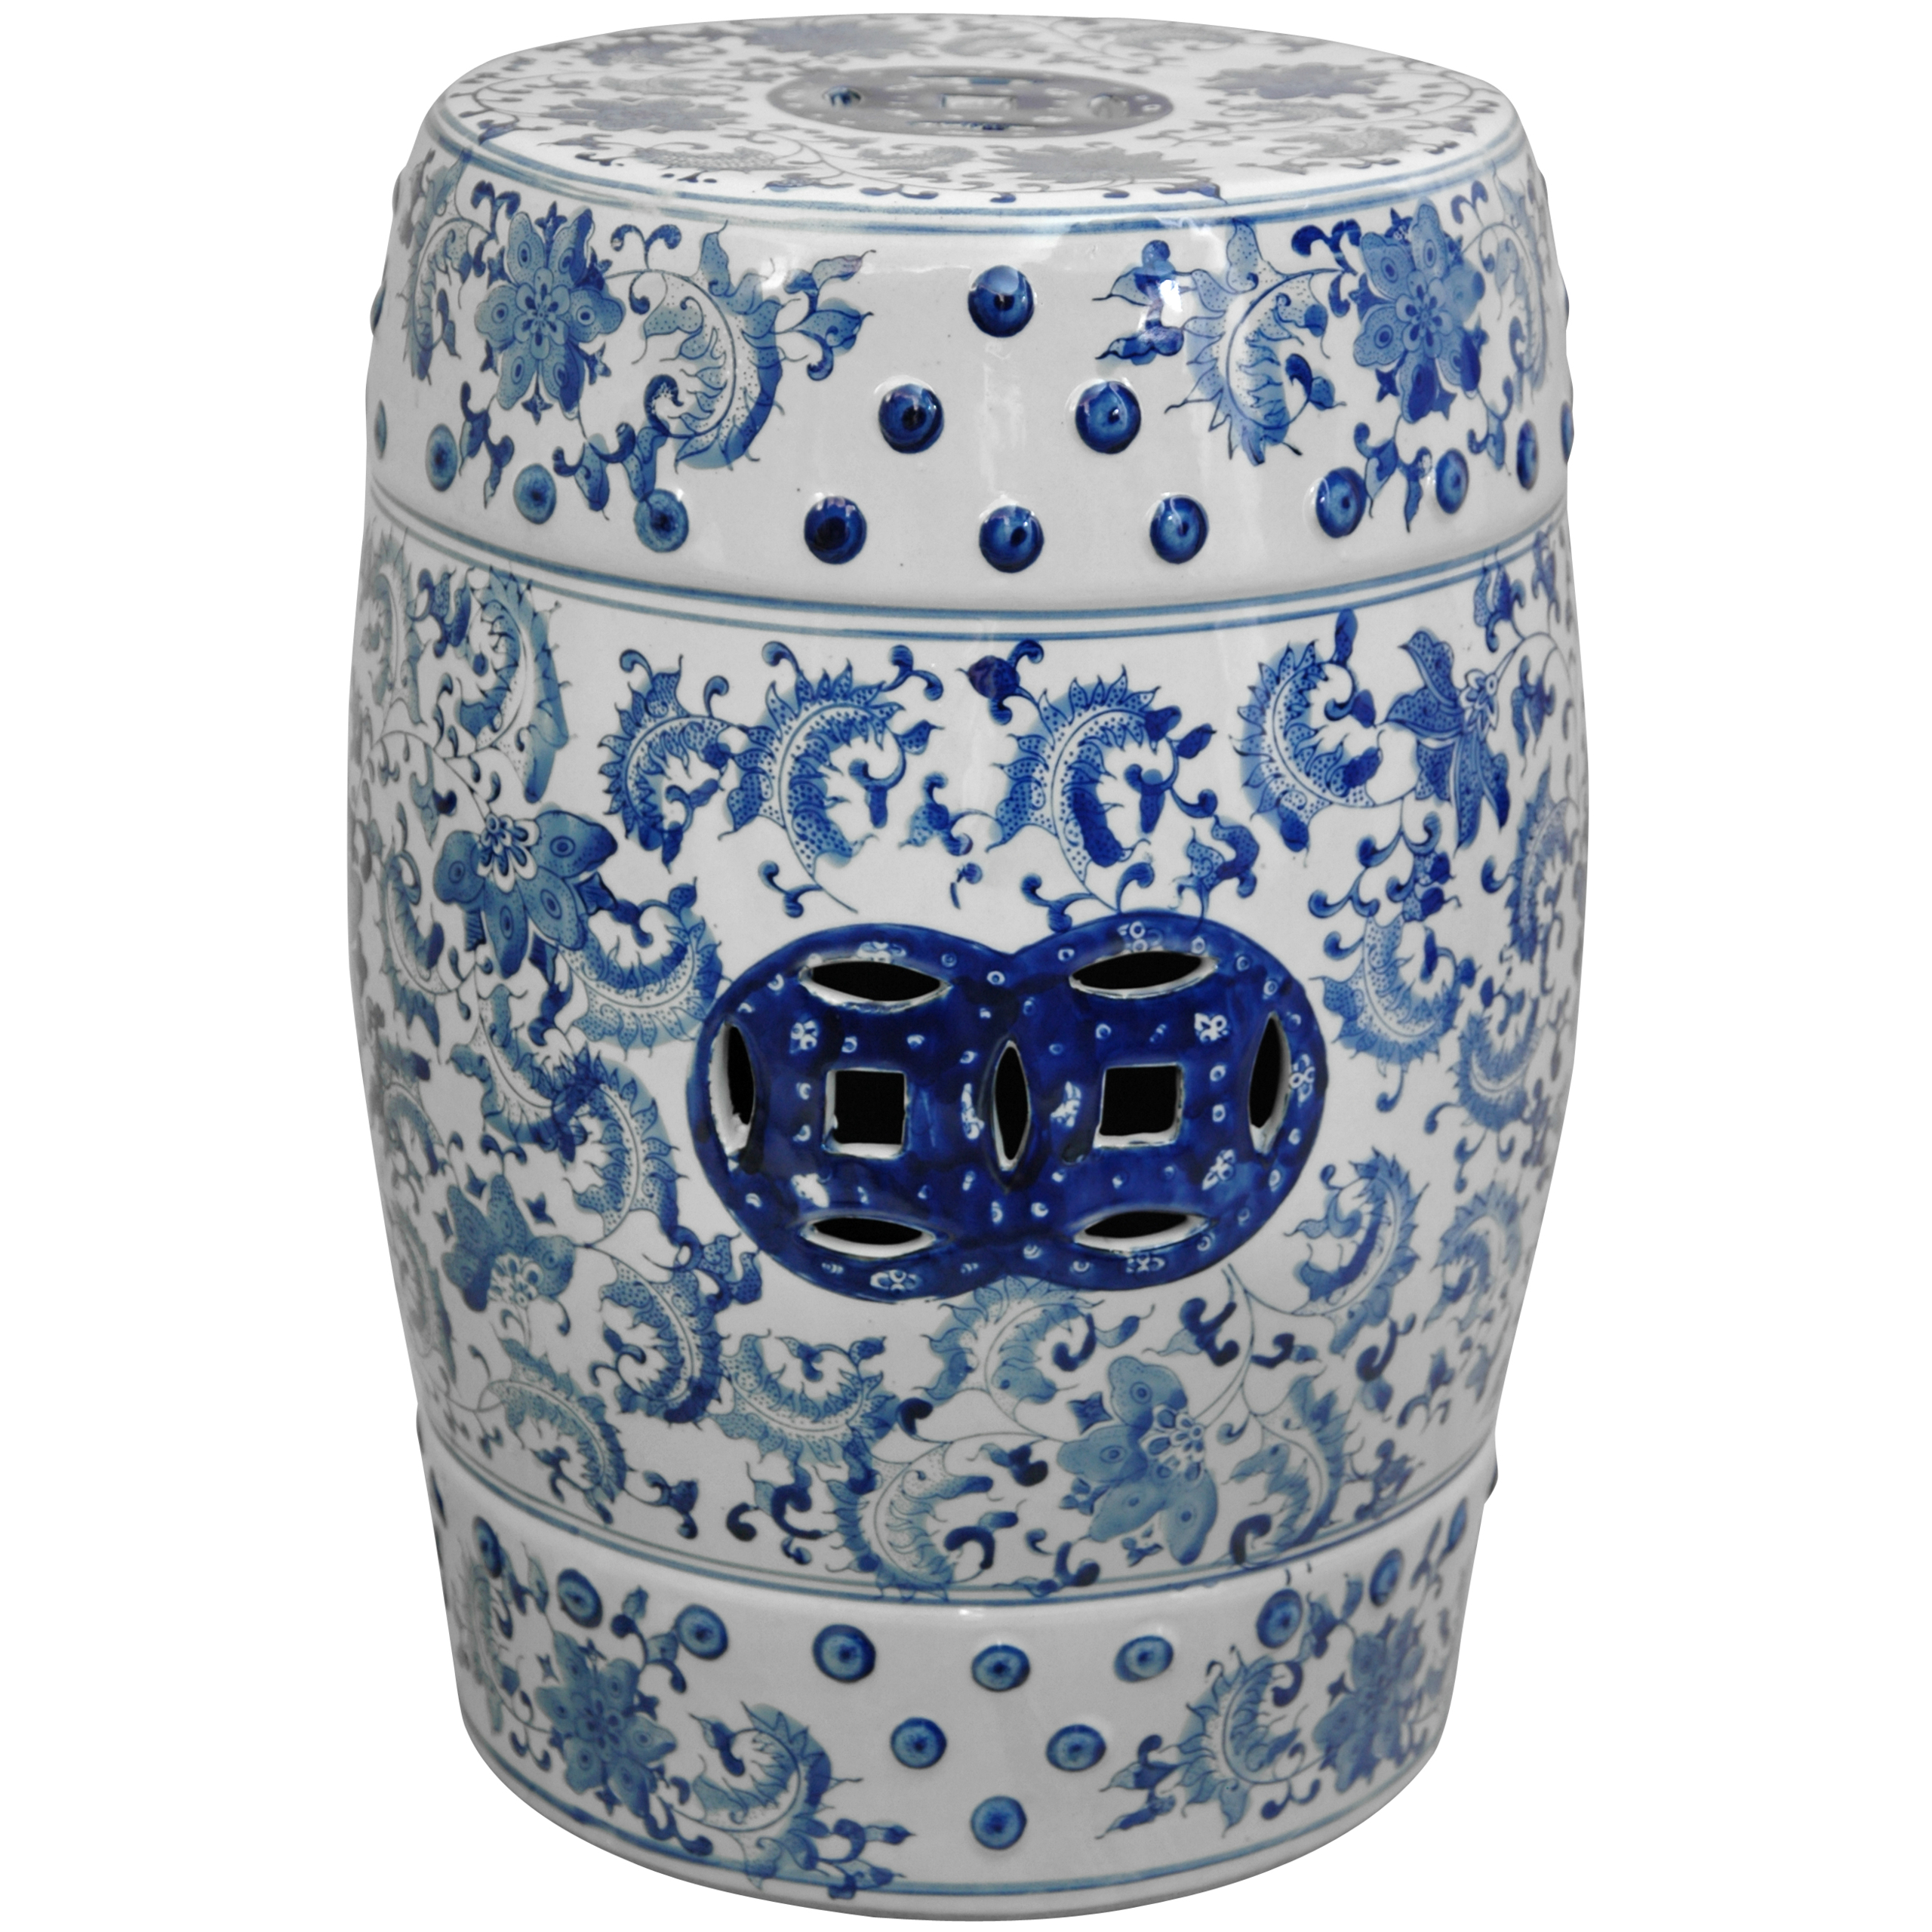 Oriental Furniture Traditional Asian Decor 18-Inch Blue and White Chinese Porcelain Garden Stool, Round with Floral Design